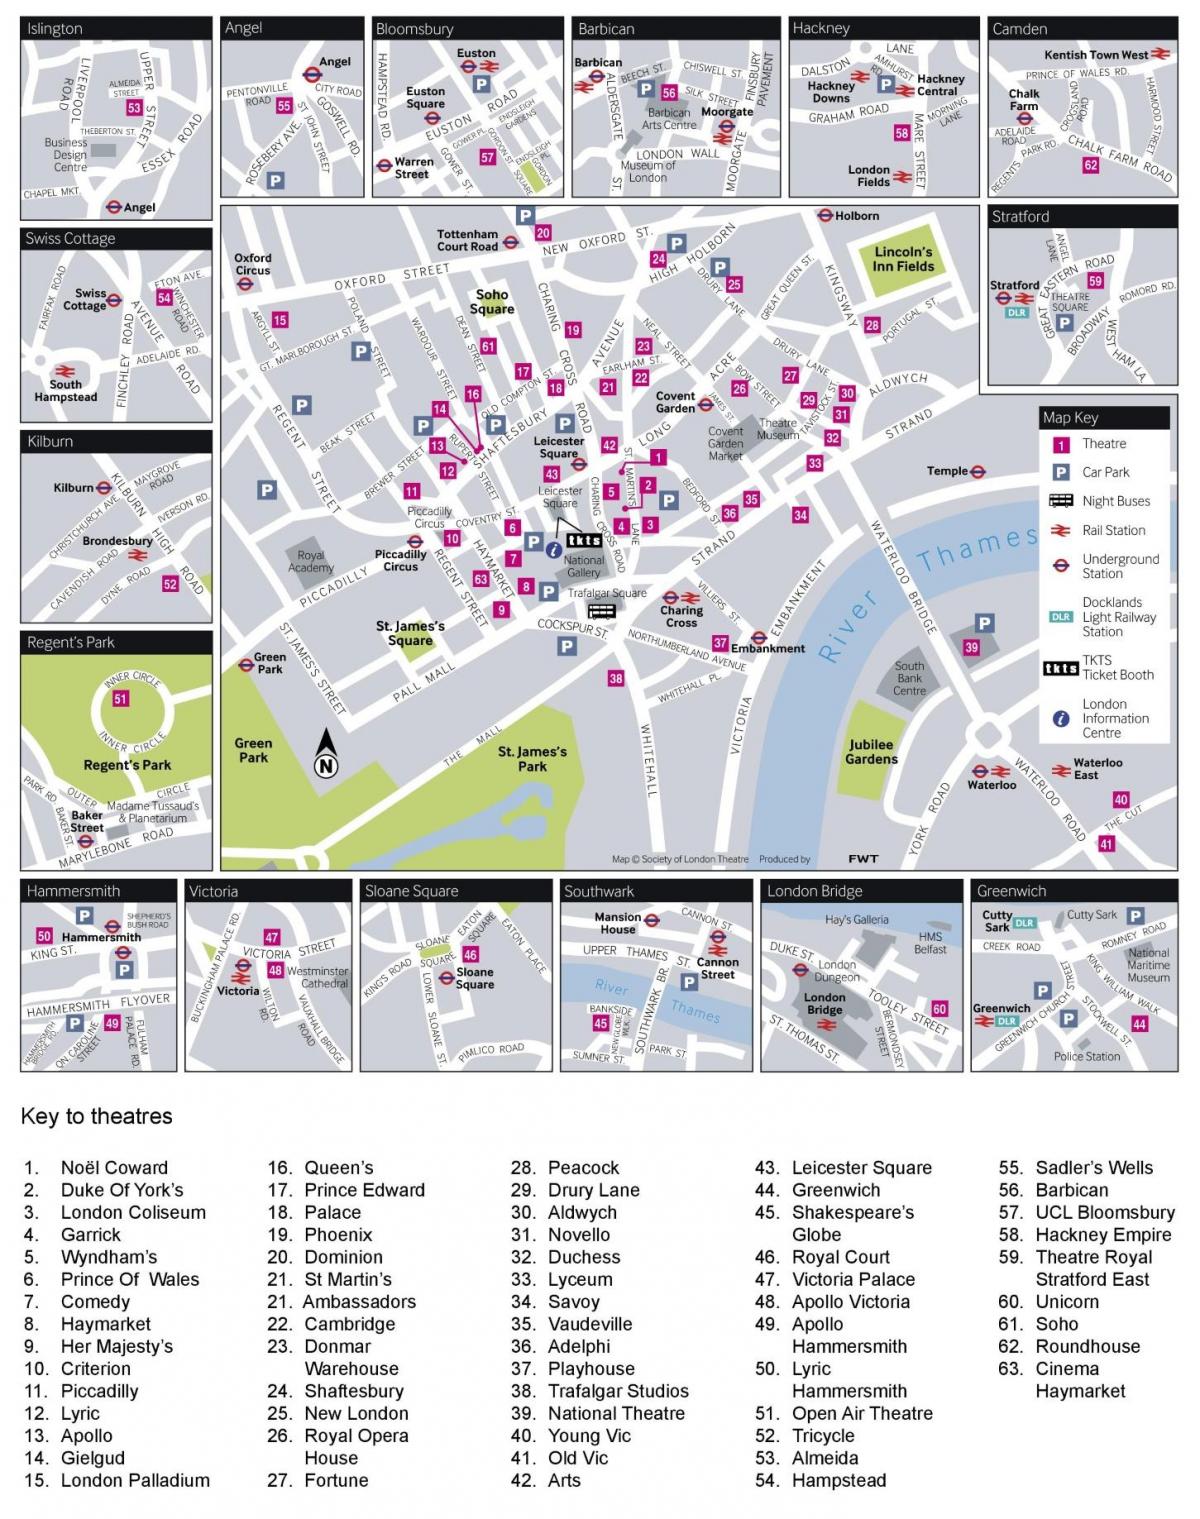 map of theaters London